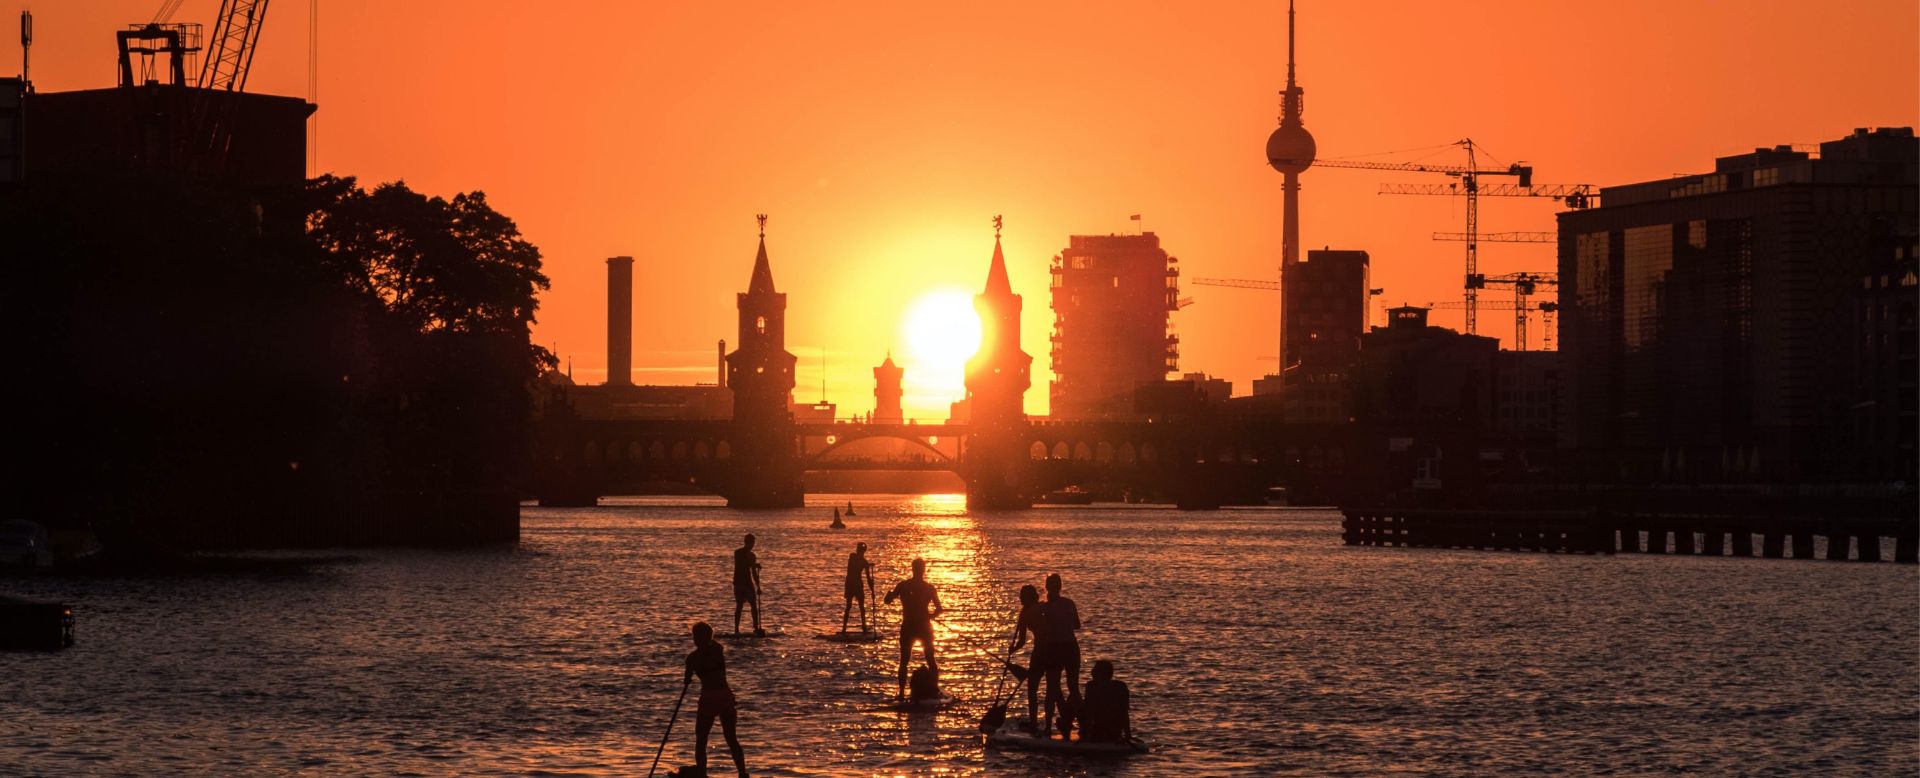 image of paddle surfers on the River Spree